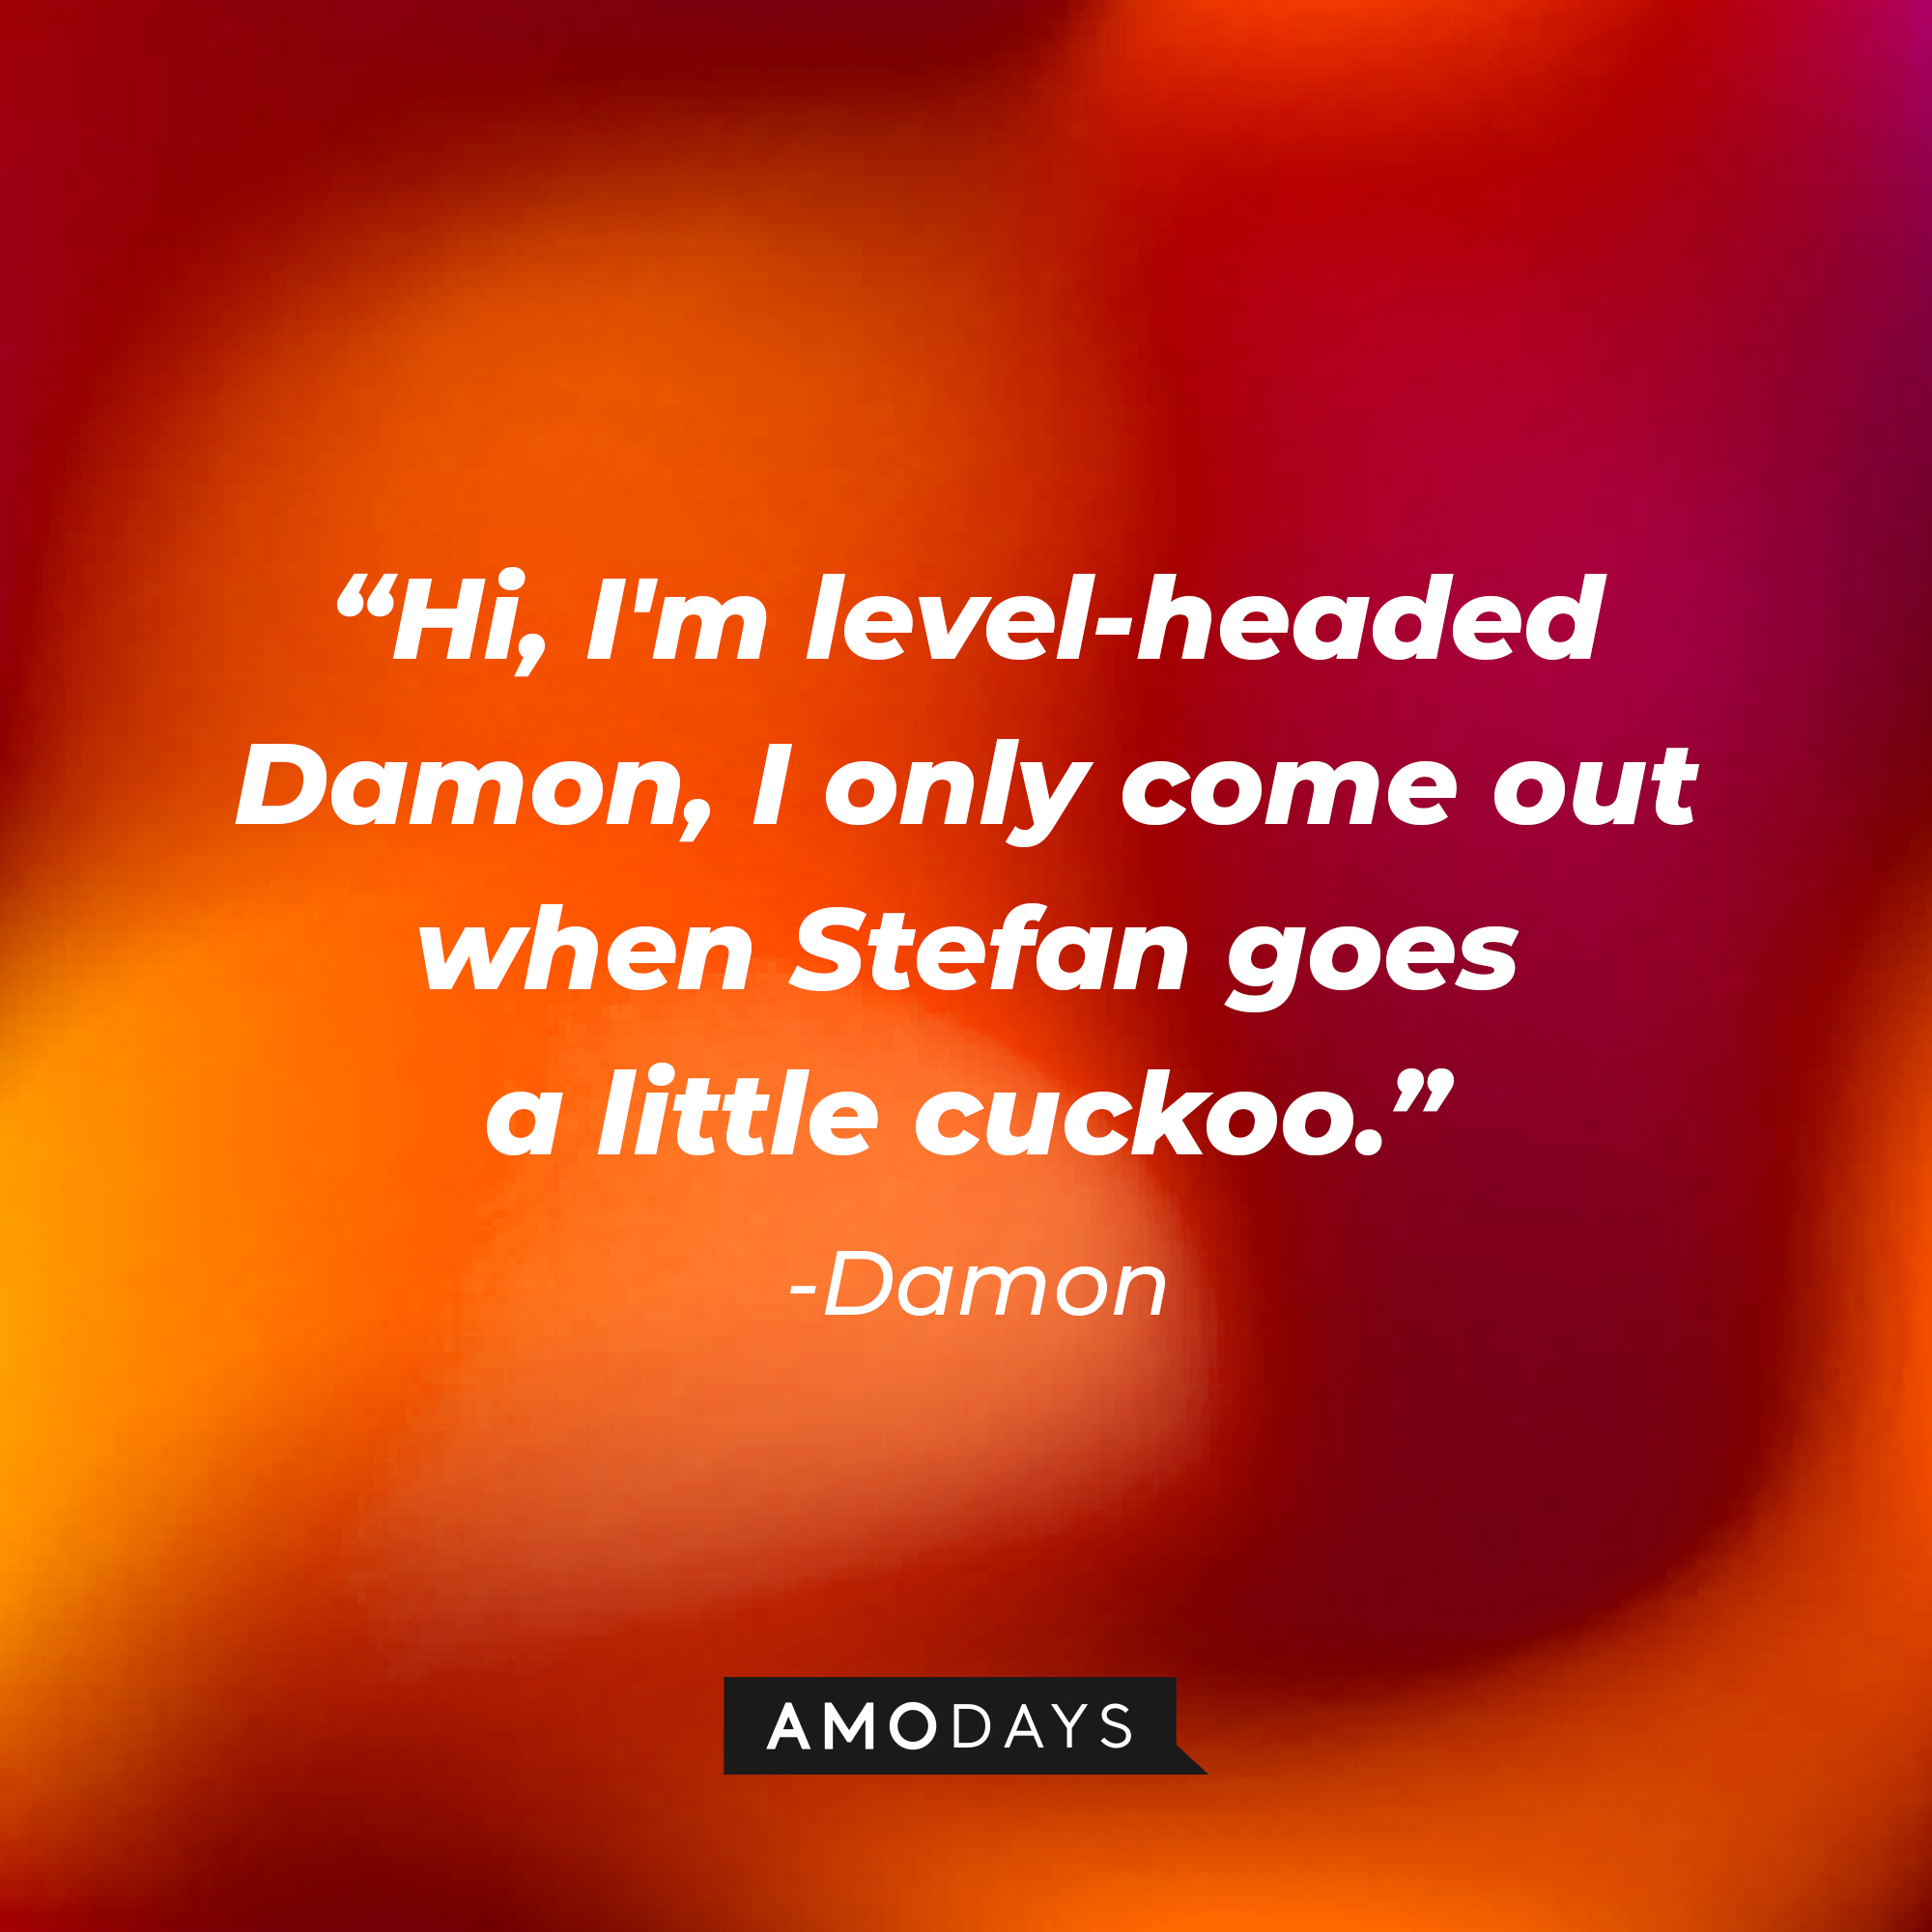 Damon's quote: "Hi, I'm level-headed Damon, I only come out when Stefan goes a little cuckoo." | Source: Amodays